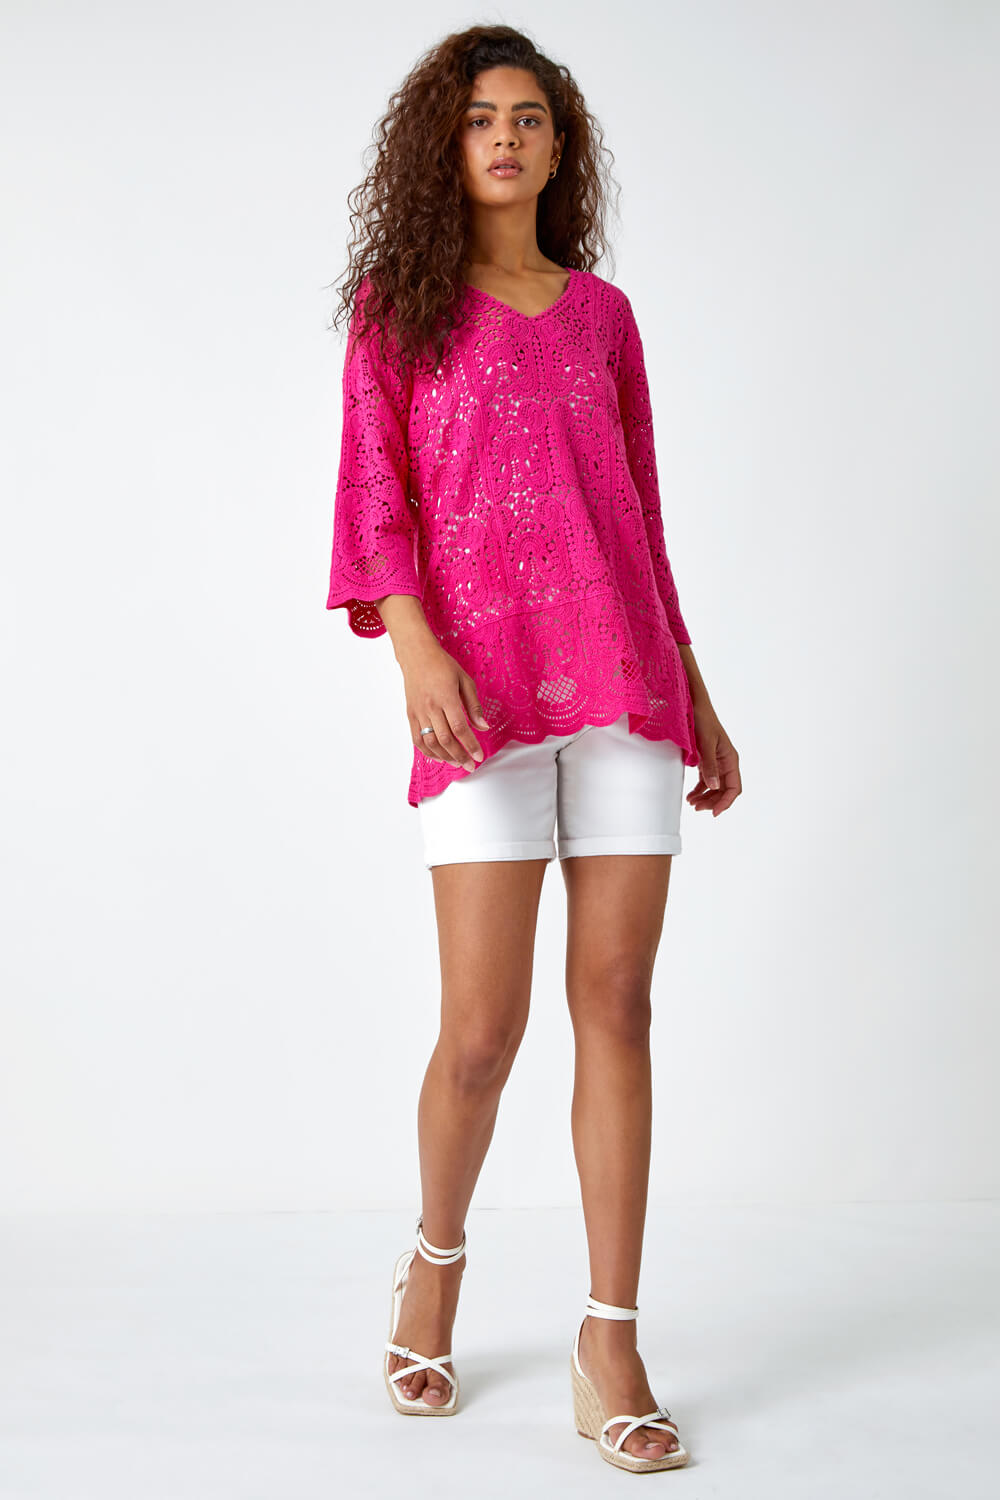 PINK Cotton Crochet Tunic Top, Image 2 of 5